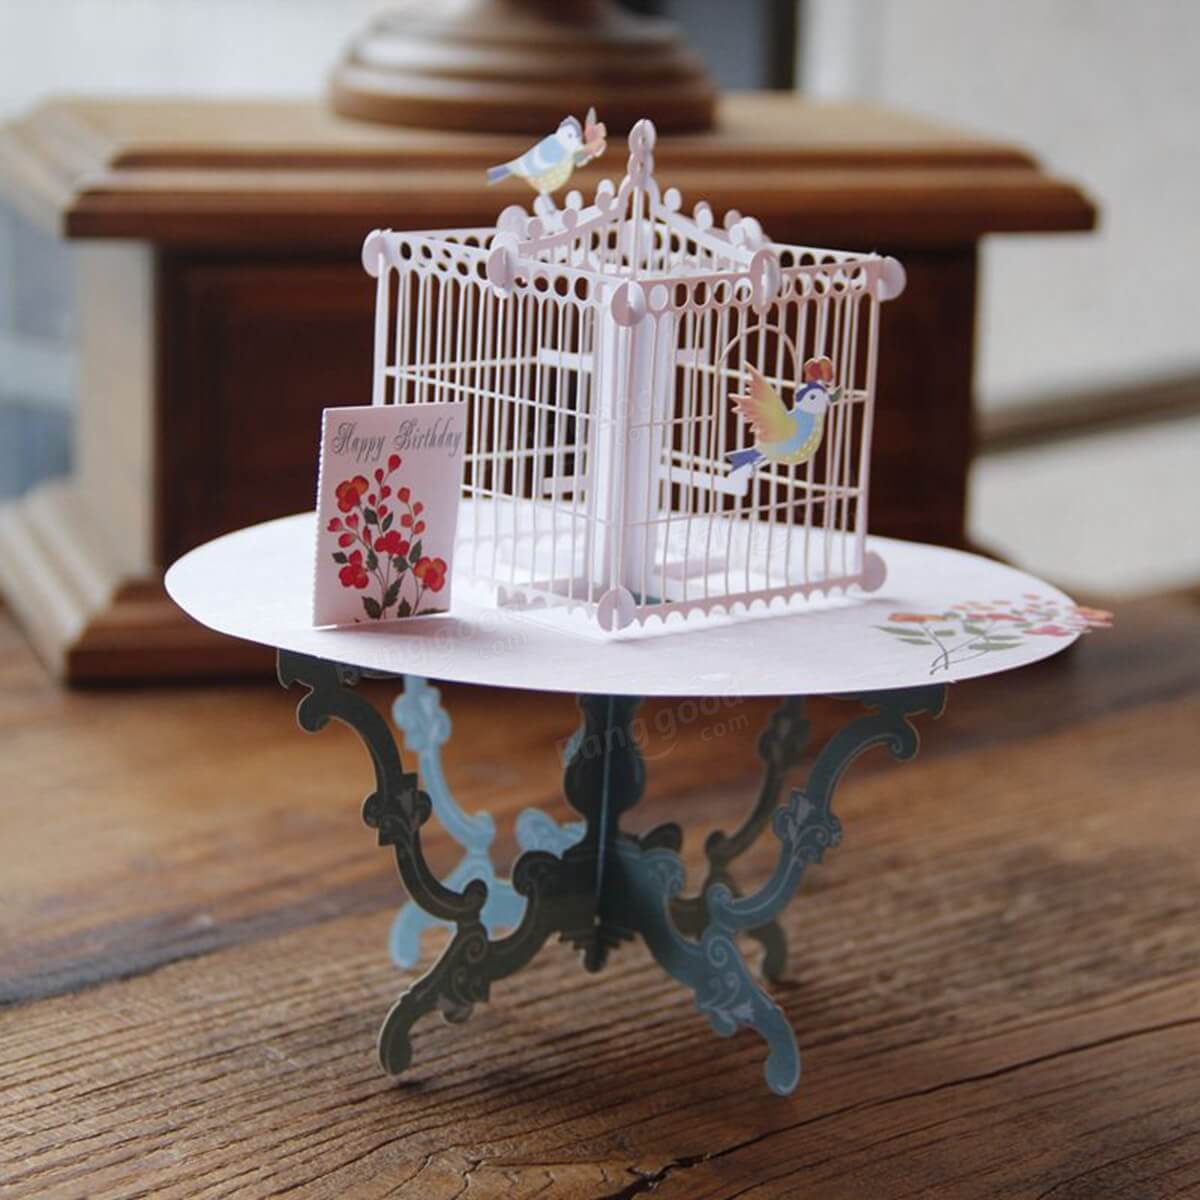 A birdcage holiday holder for your Xmas cards